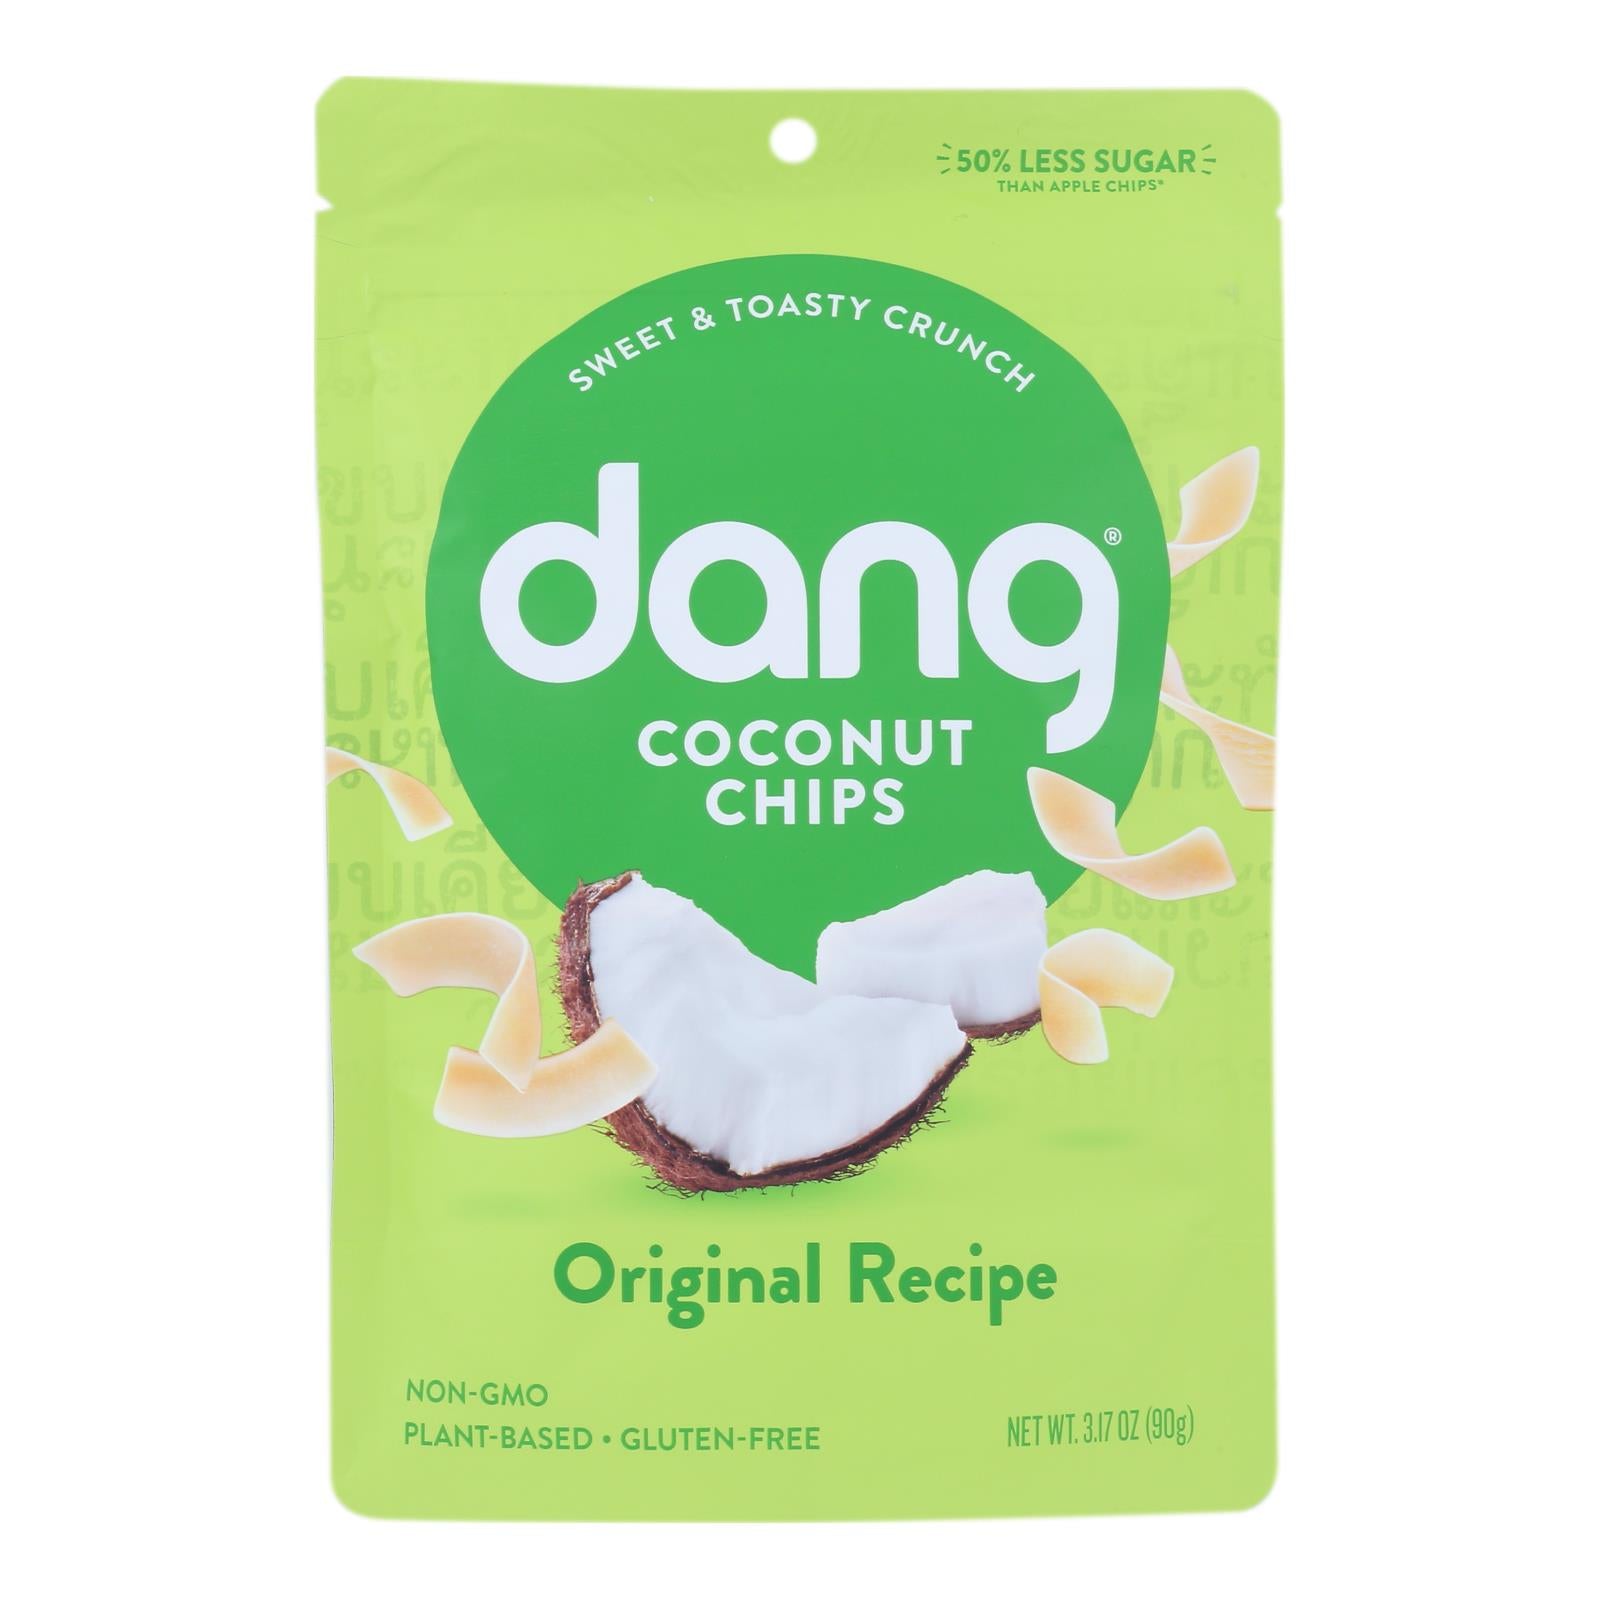 Dang - Toasted Coconut Chips - Original Recipe - Case Of 12 - 3.17 Oz.